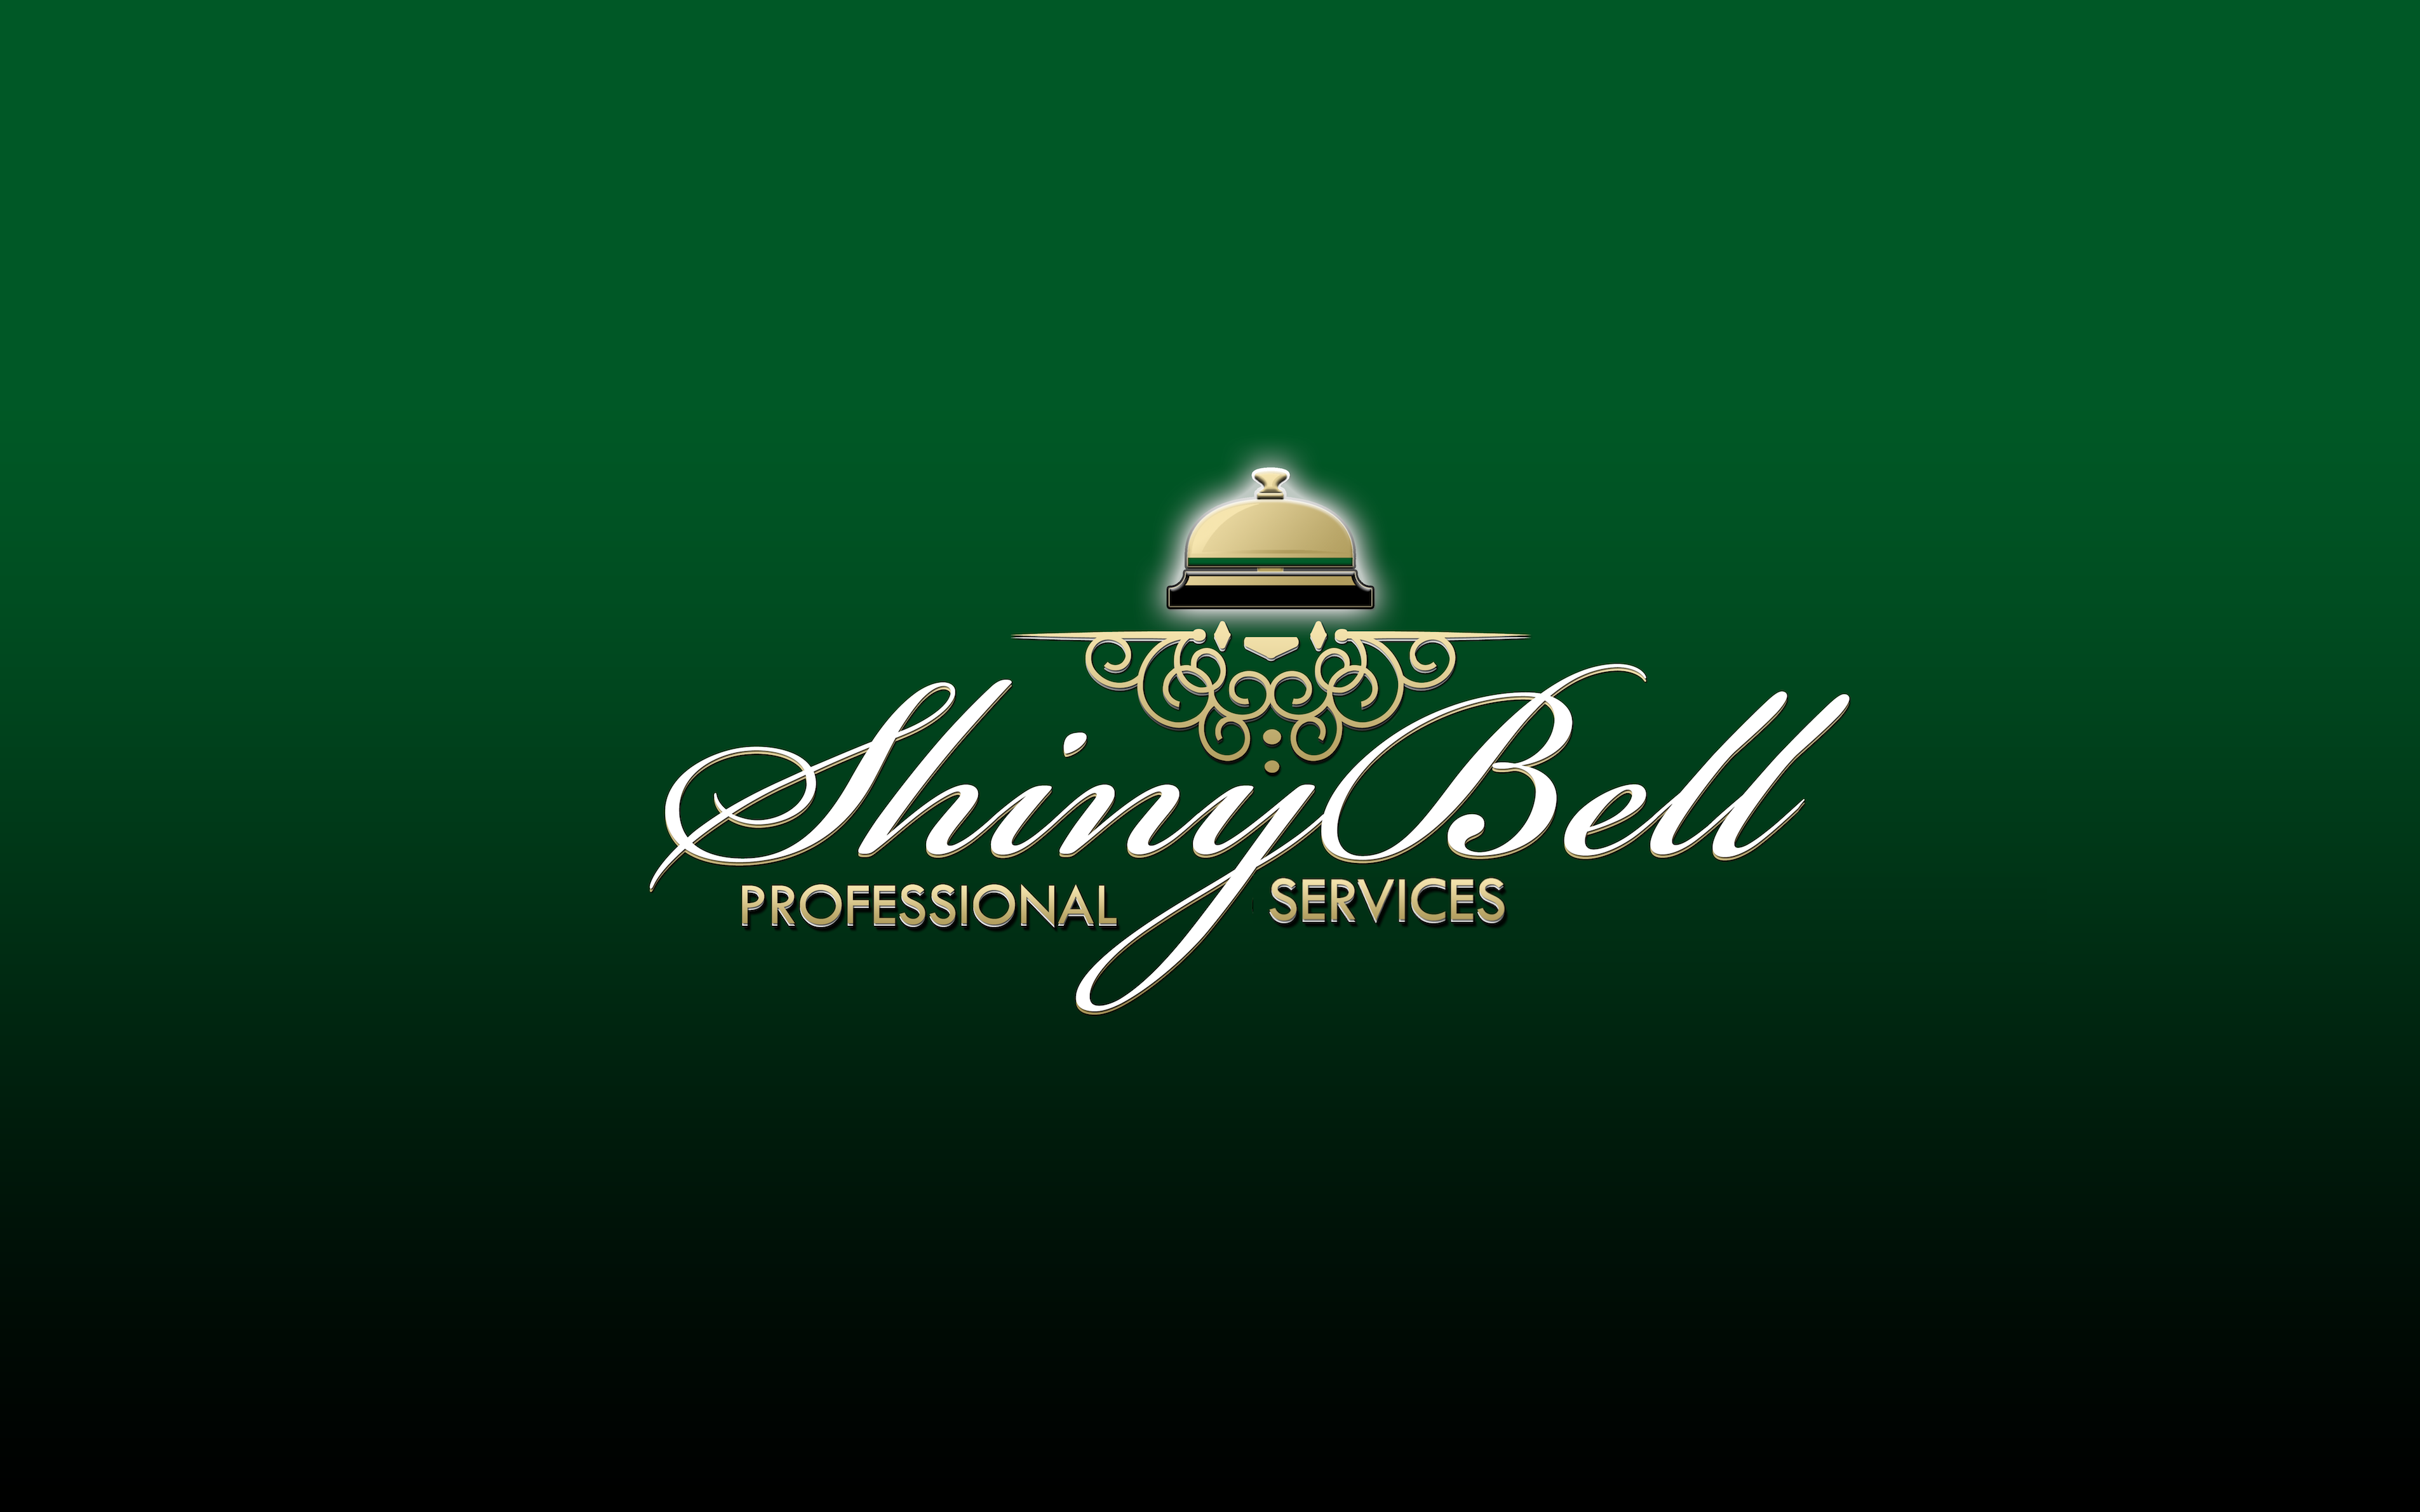 Shiny Bell Professional Services Logo